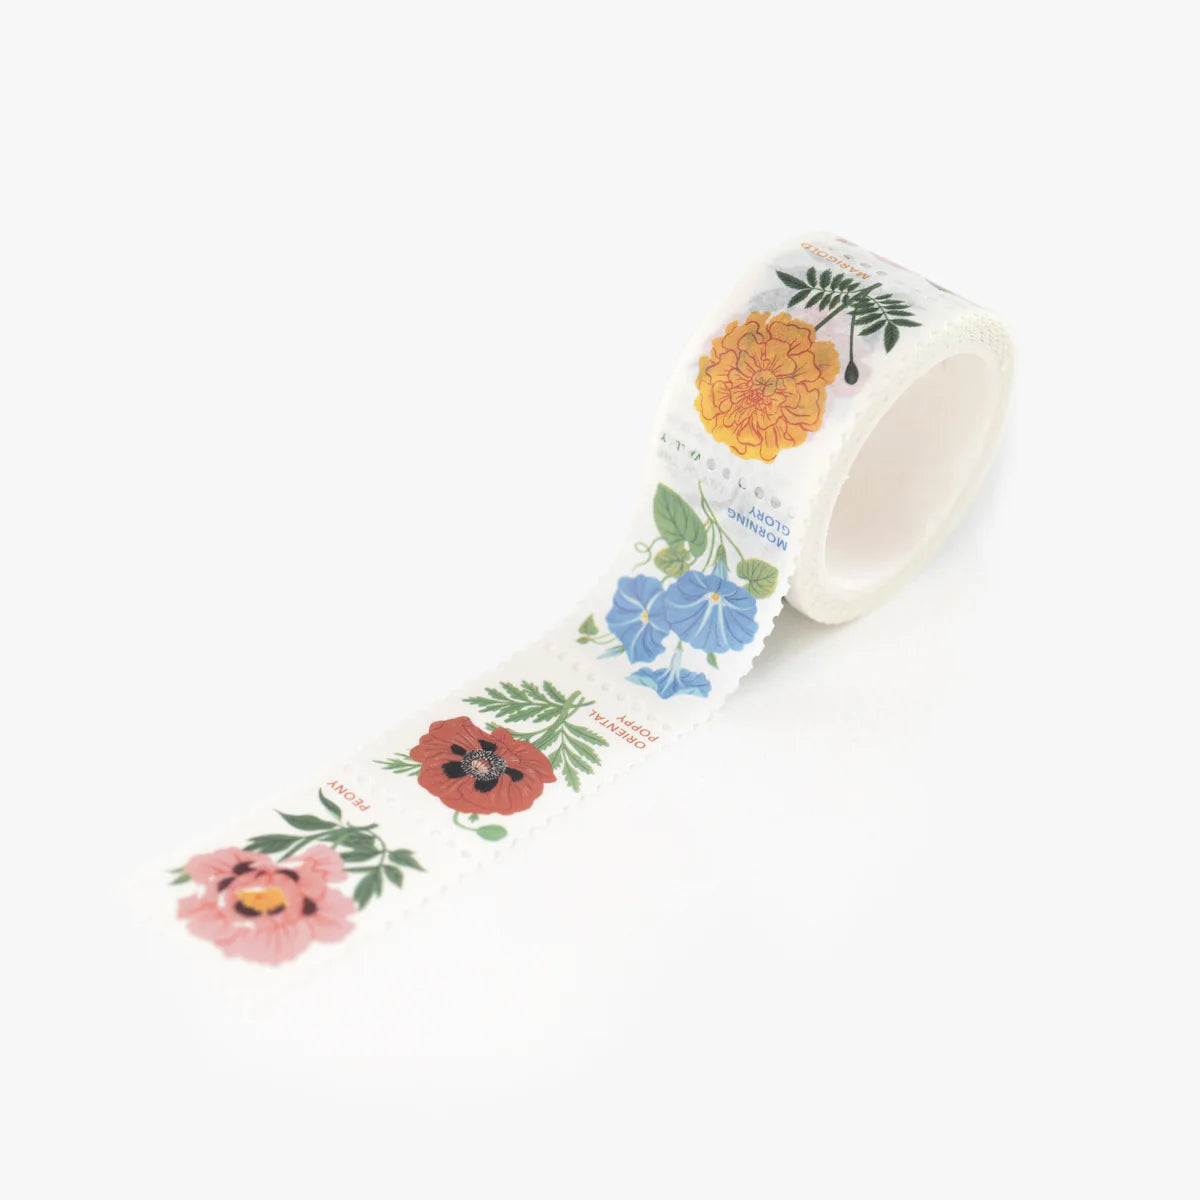 Washi tape Florals perforated by Botanica Paper co.